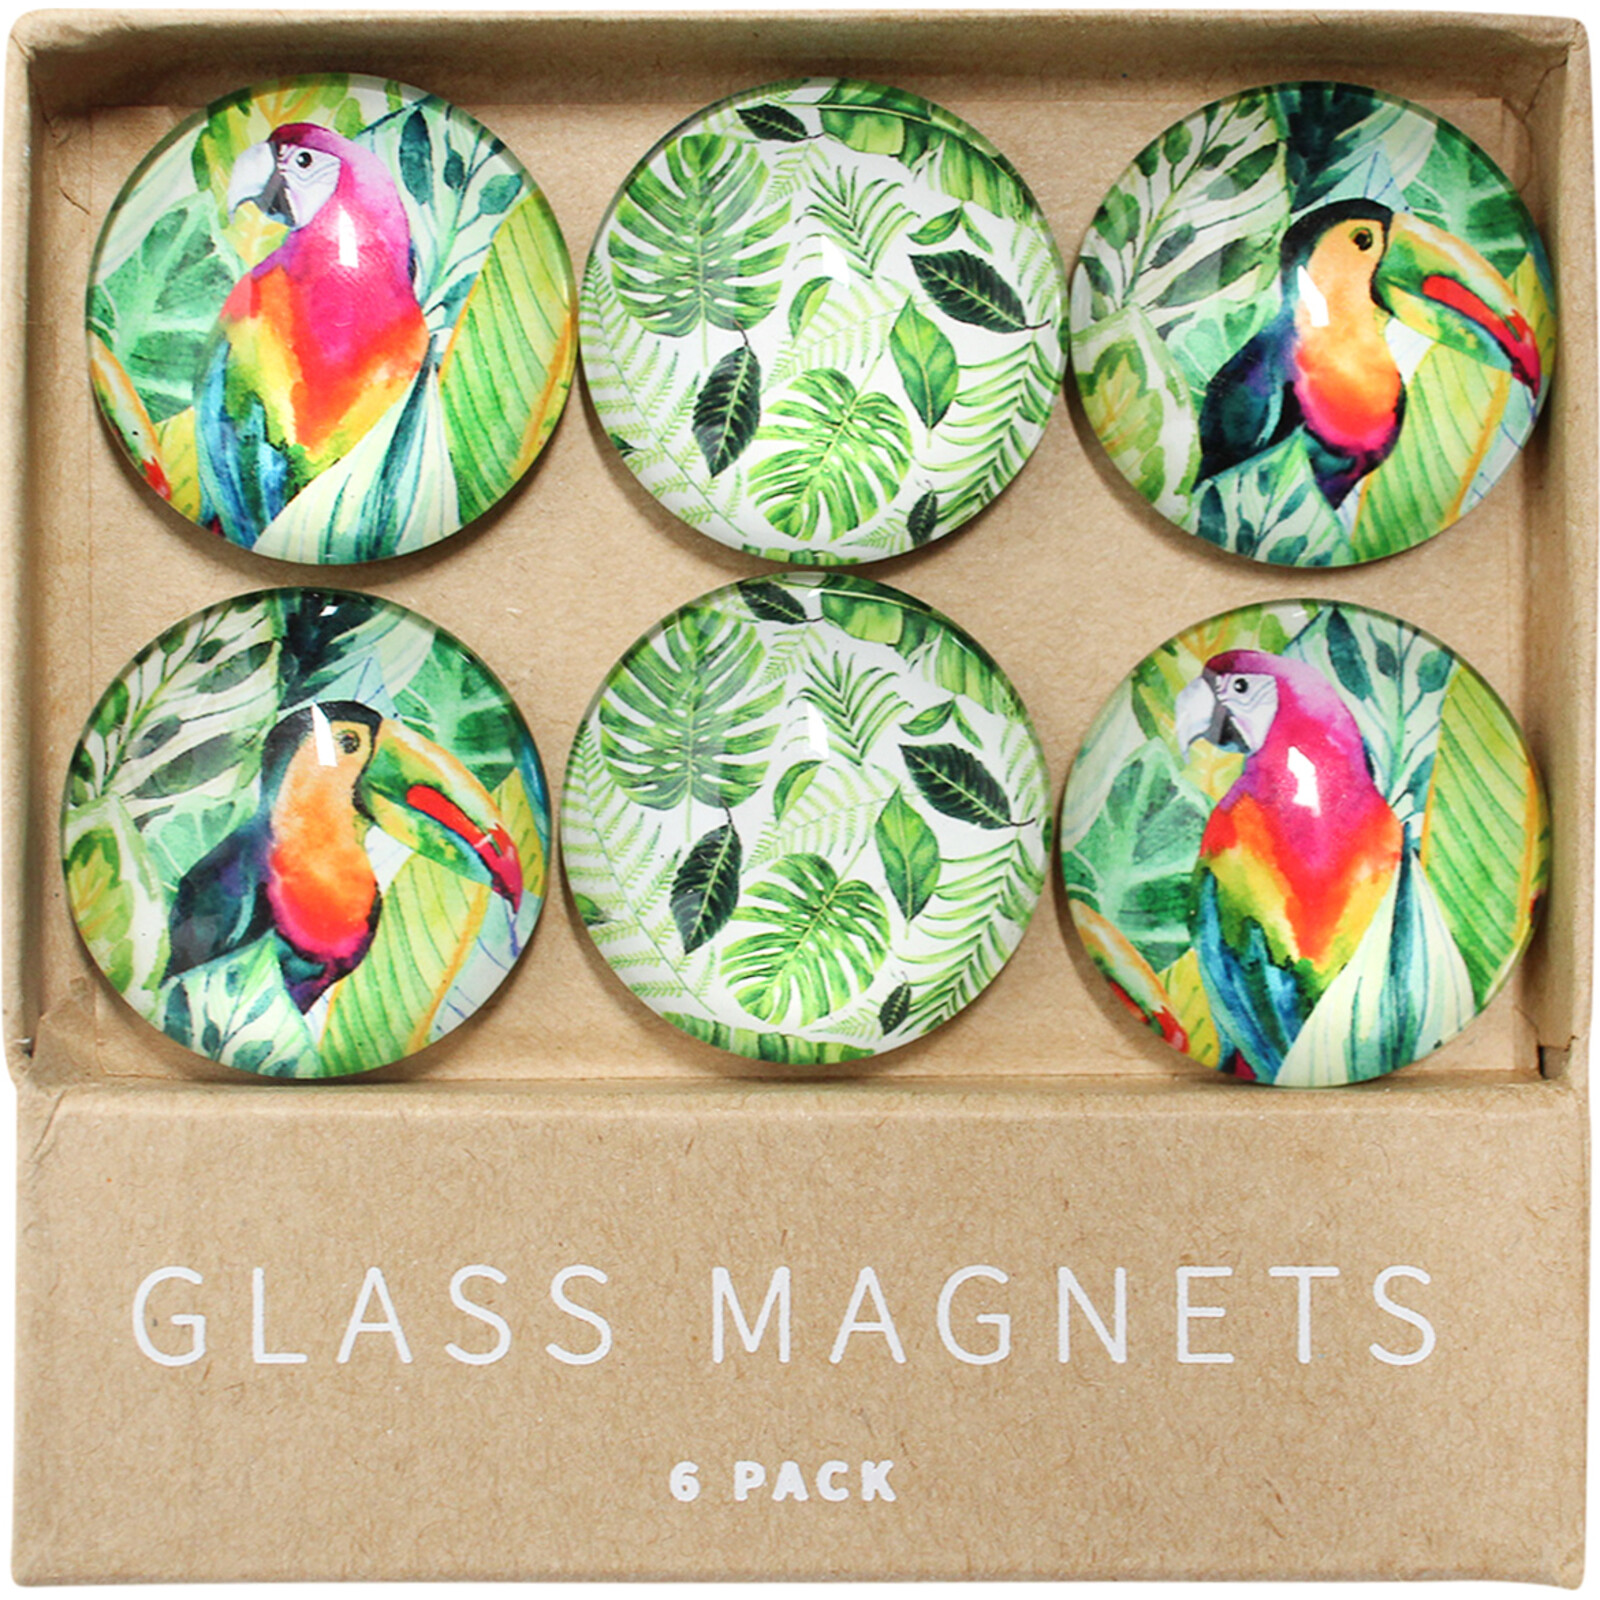 Glass Magnets Tropic S/6